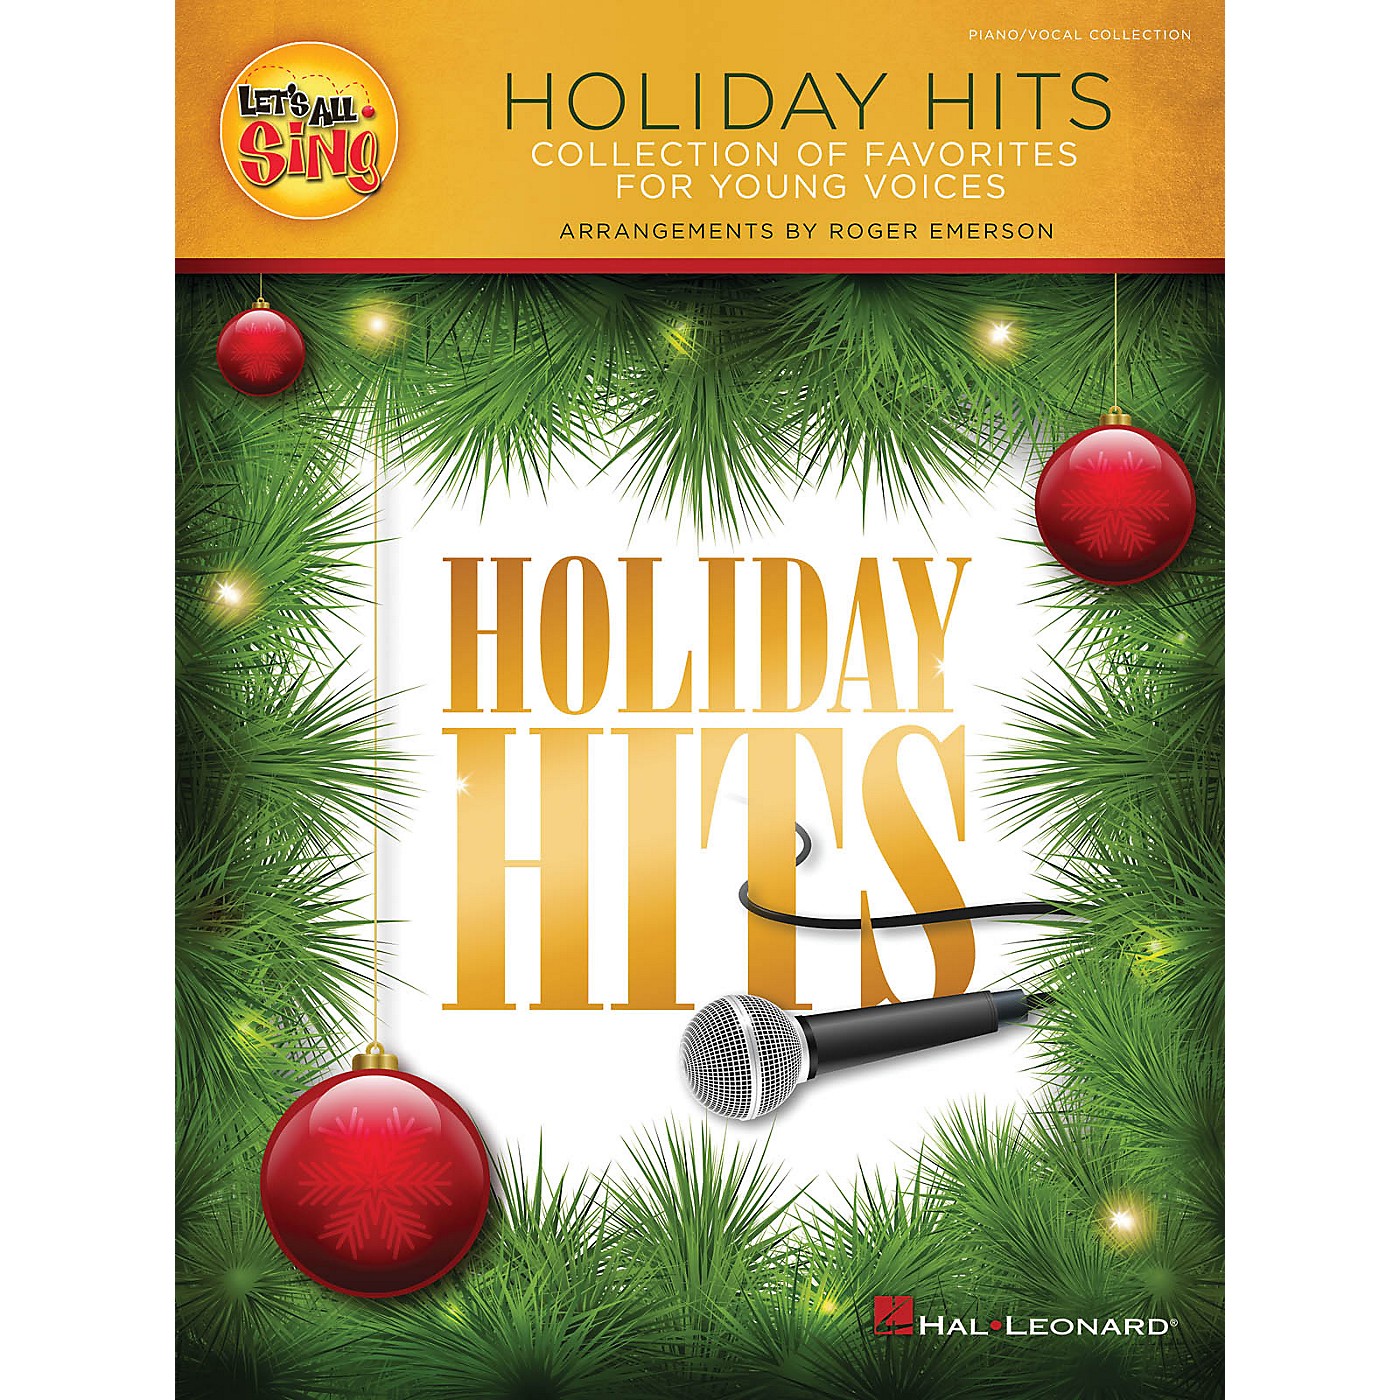 Hal Leonard Let's All Sing Holiday Hits (Collection of Favorites for Young Voices) Singer 10 Pak by Roger Emerson thumbnail